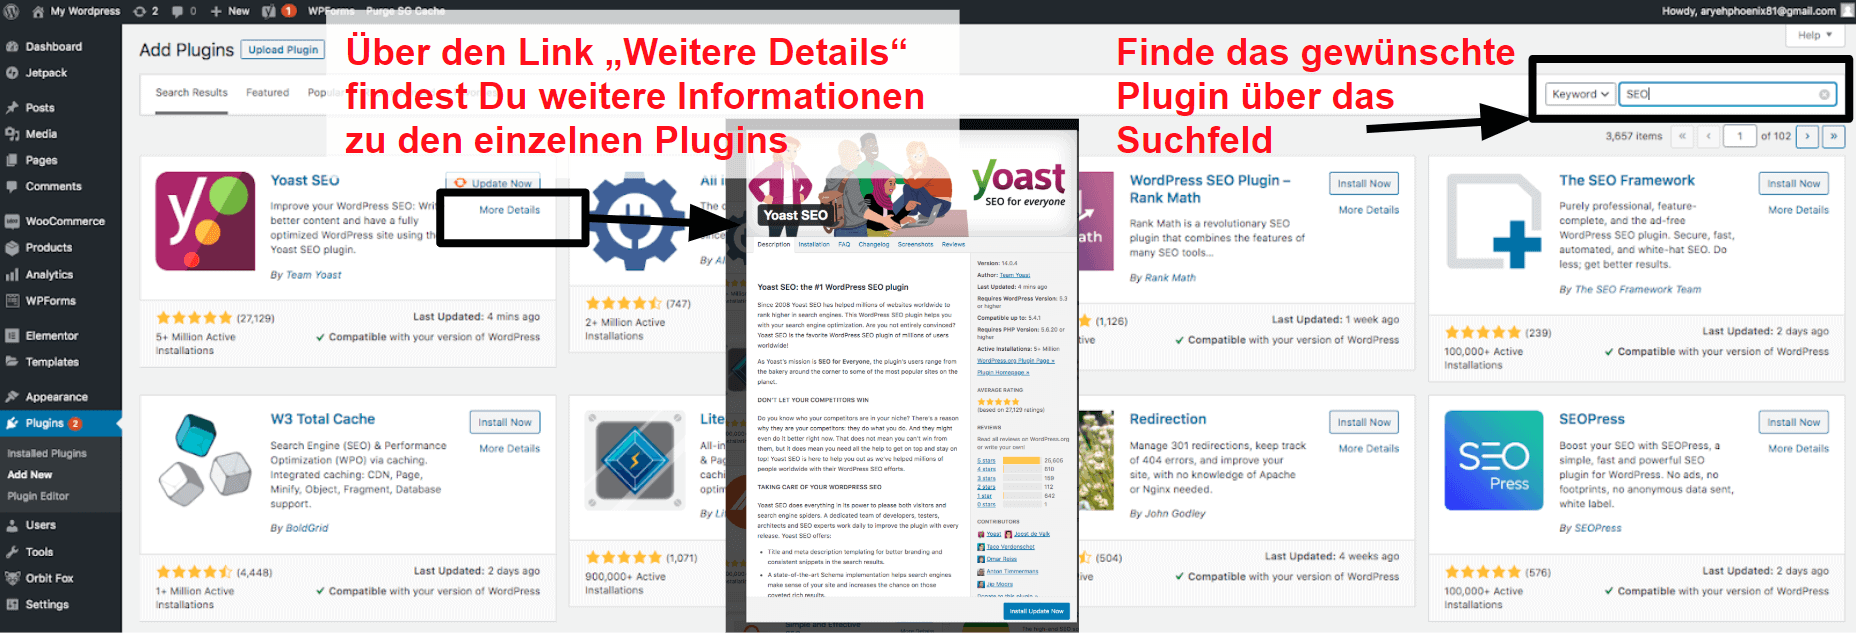 Find and install plugins easily in WordPress DE20